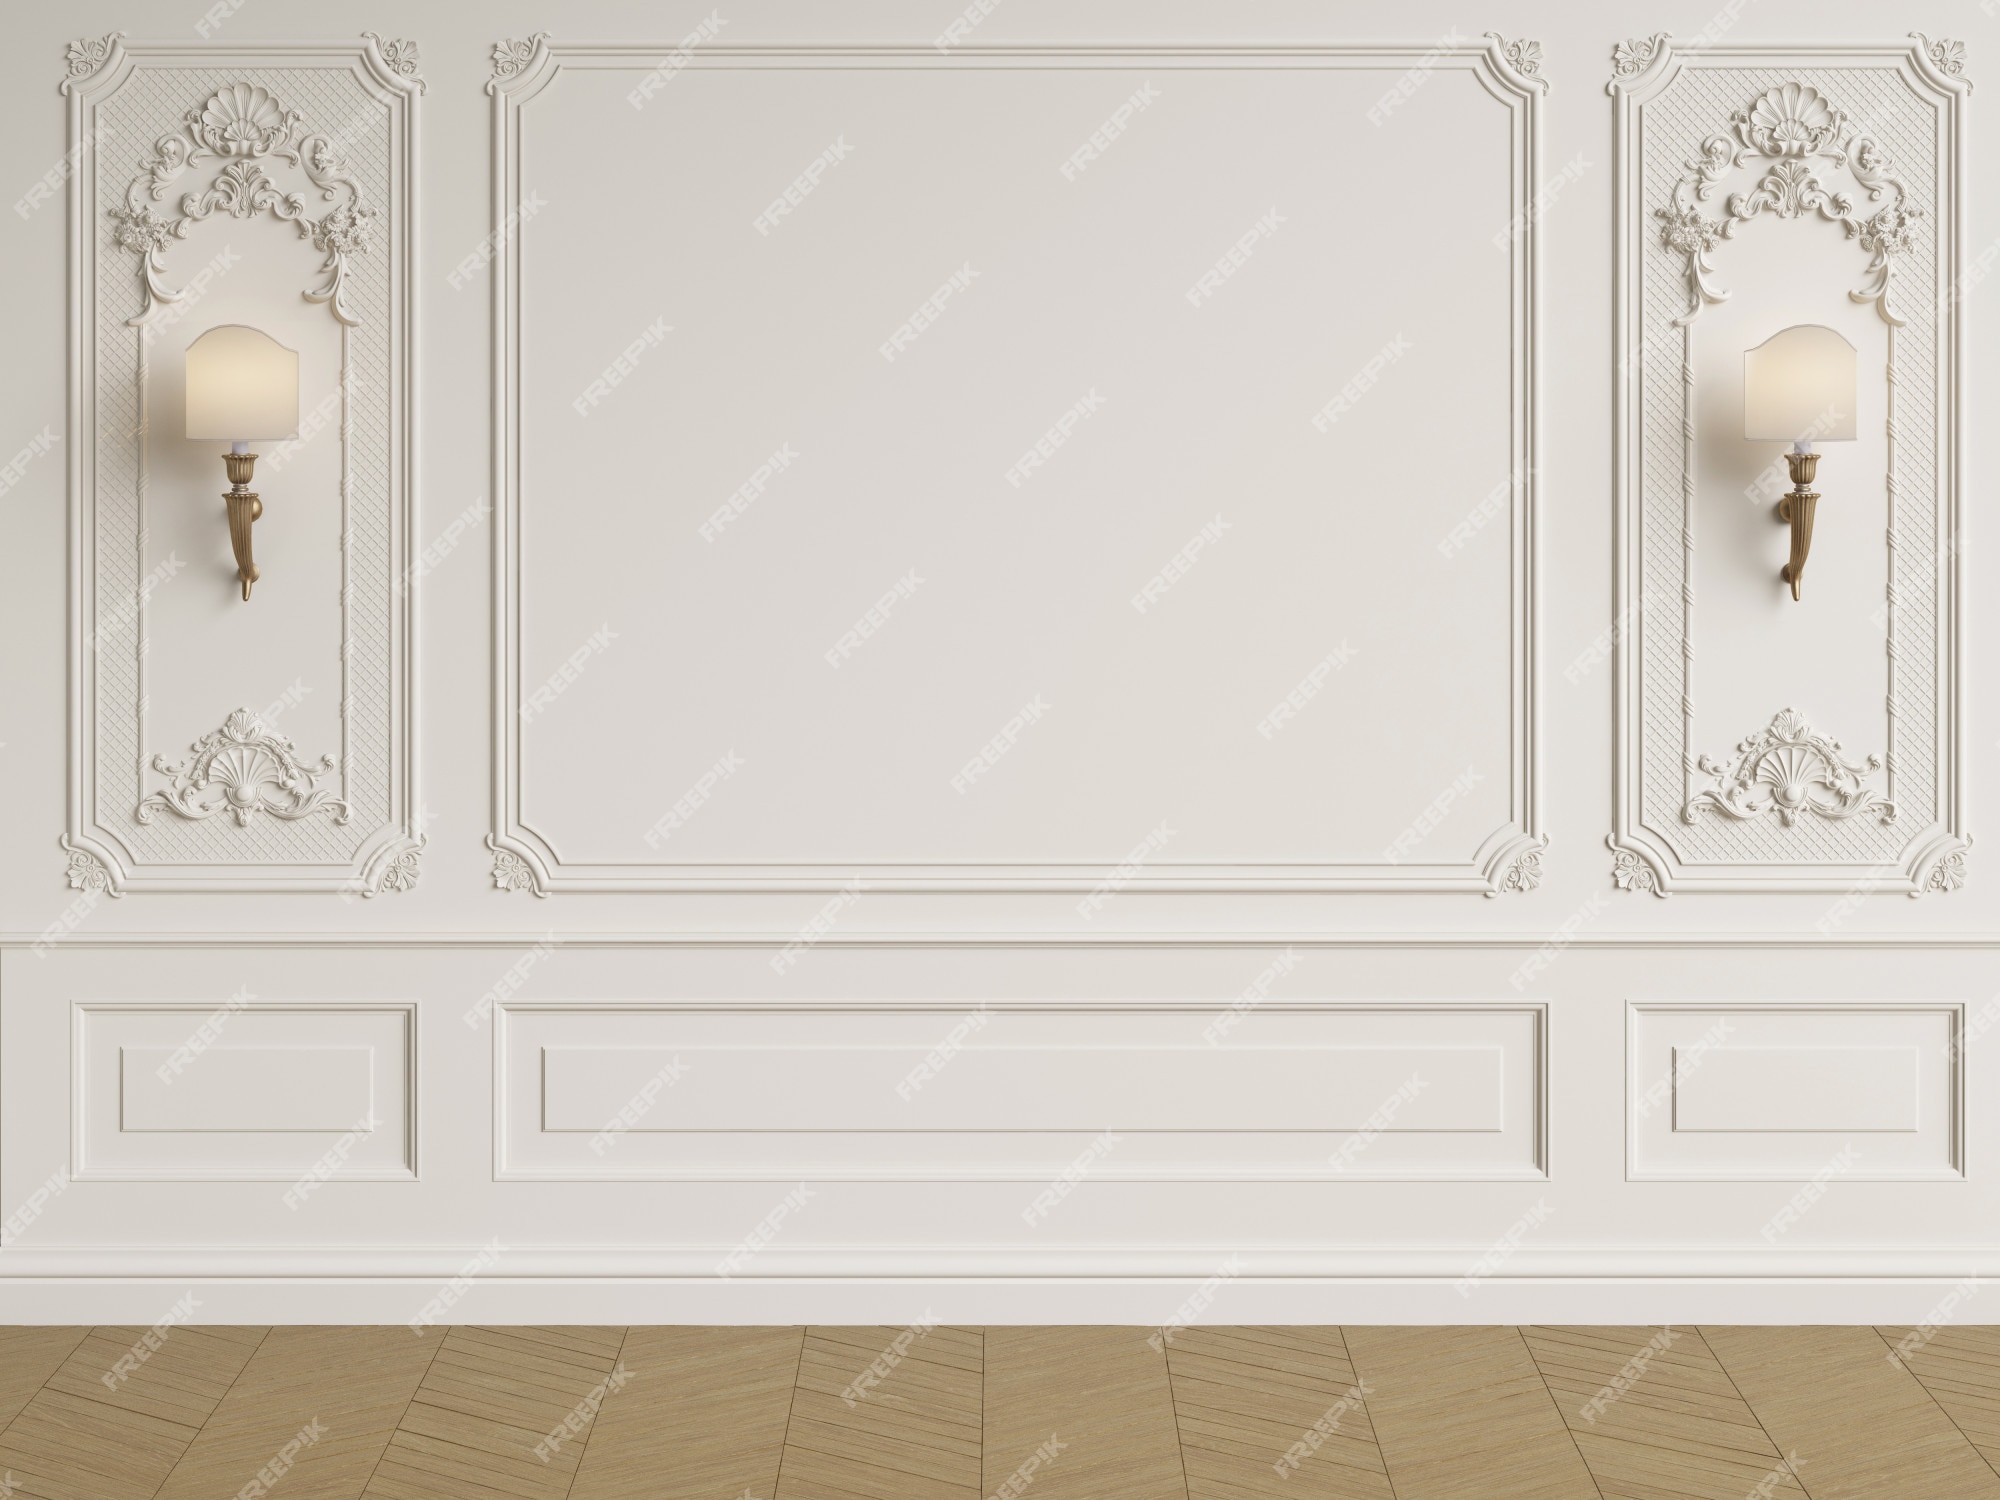 Premium Photo | Classic interior wall with mouldings